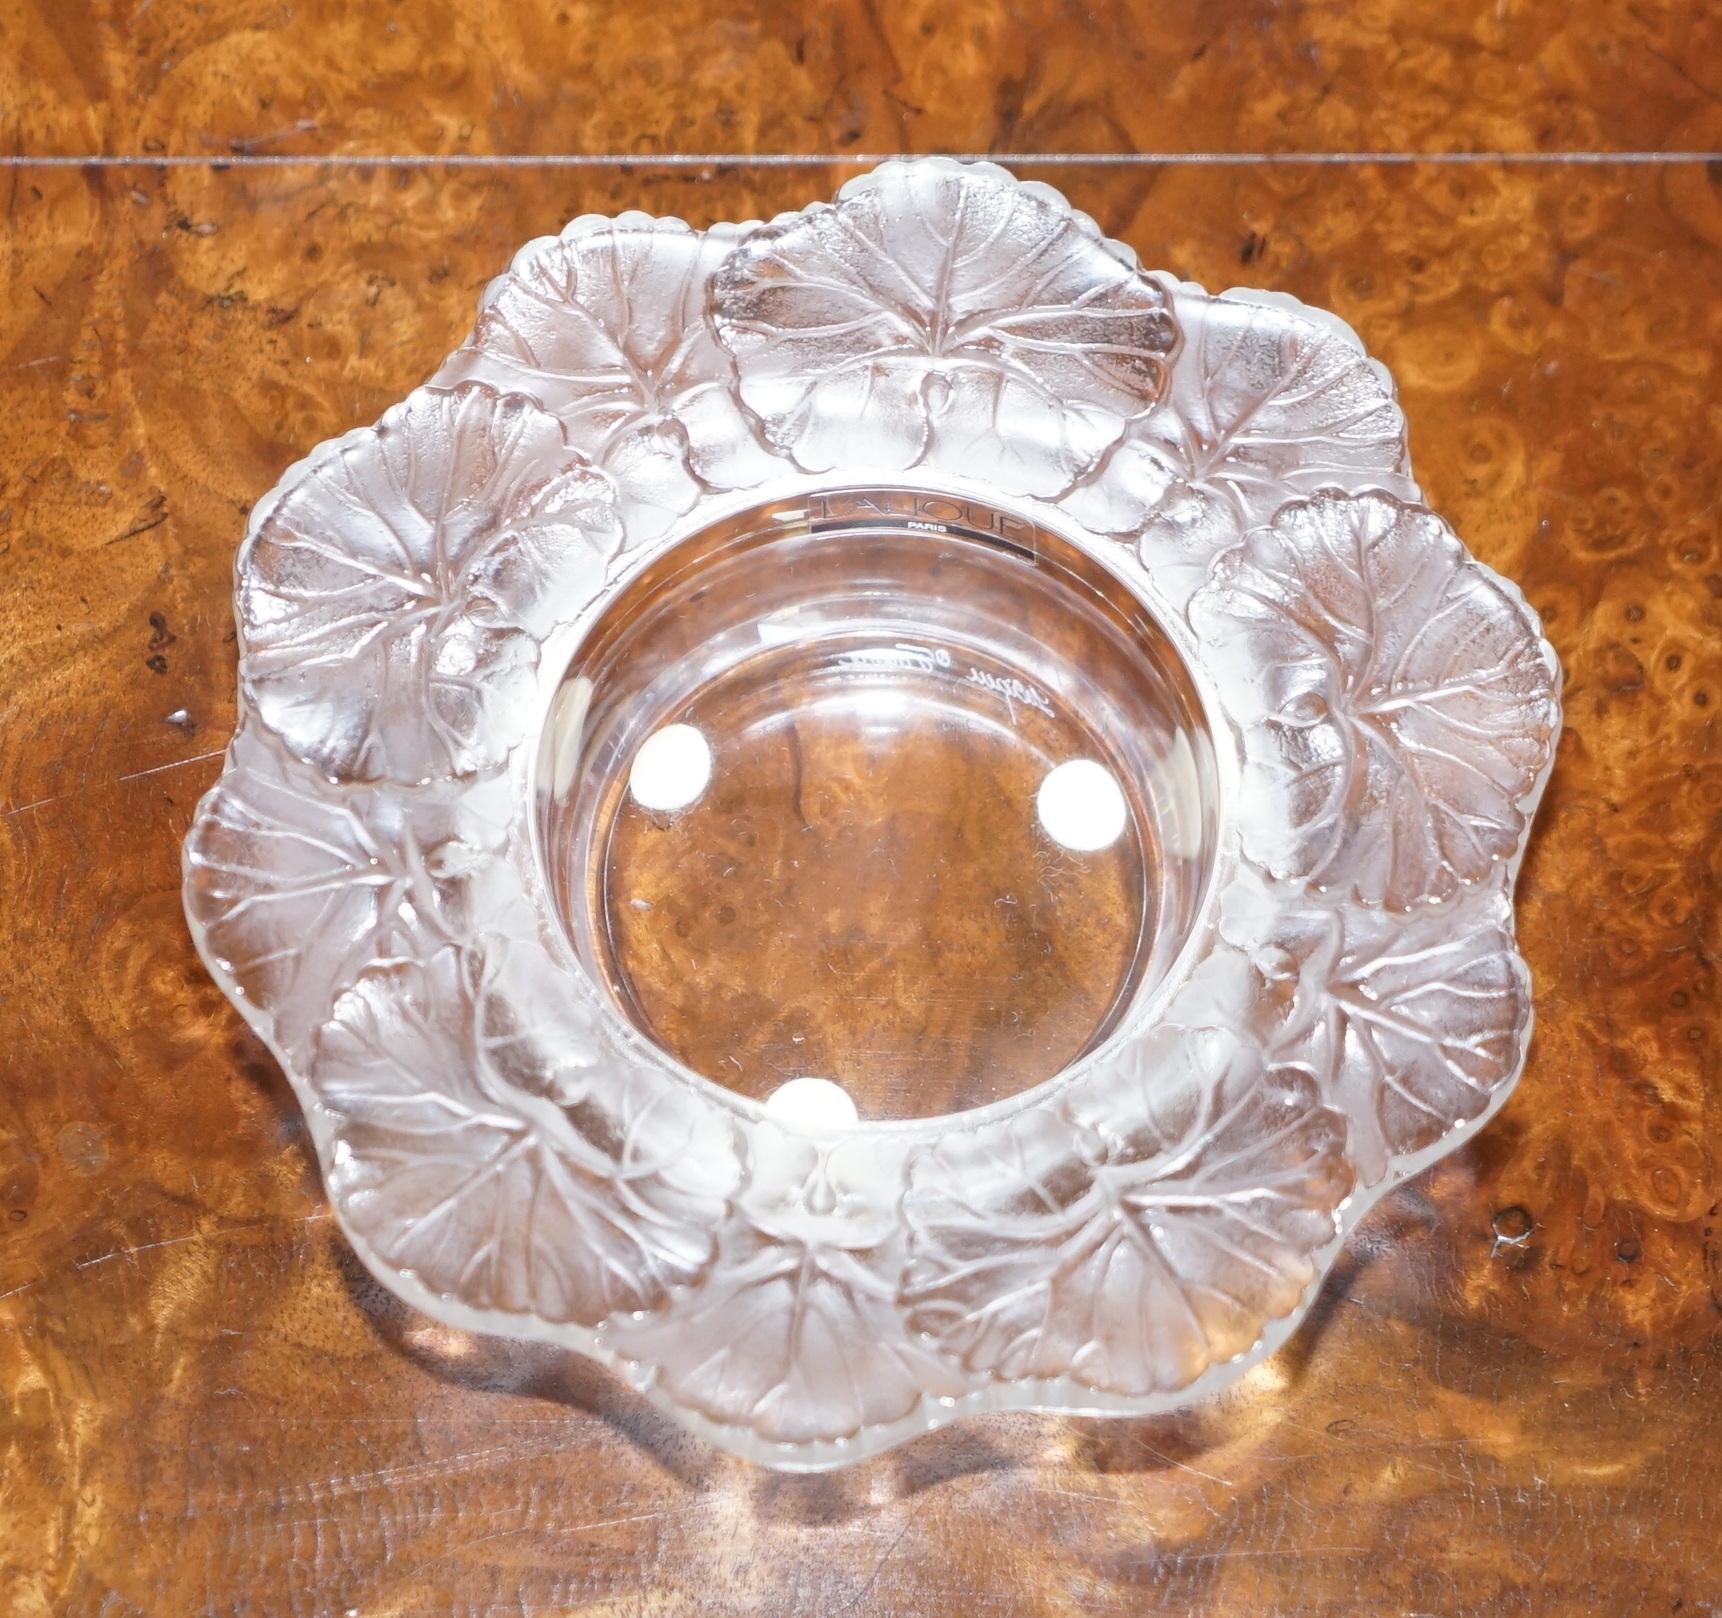 Royal House Antiques

Royal House Antiques is delighted to offer for sale pair of brand new in the original box and packaging Lalique Cendrier Honfleur small bowls

A good looking well made and decorative set, they are brand new, only removed from